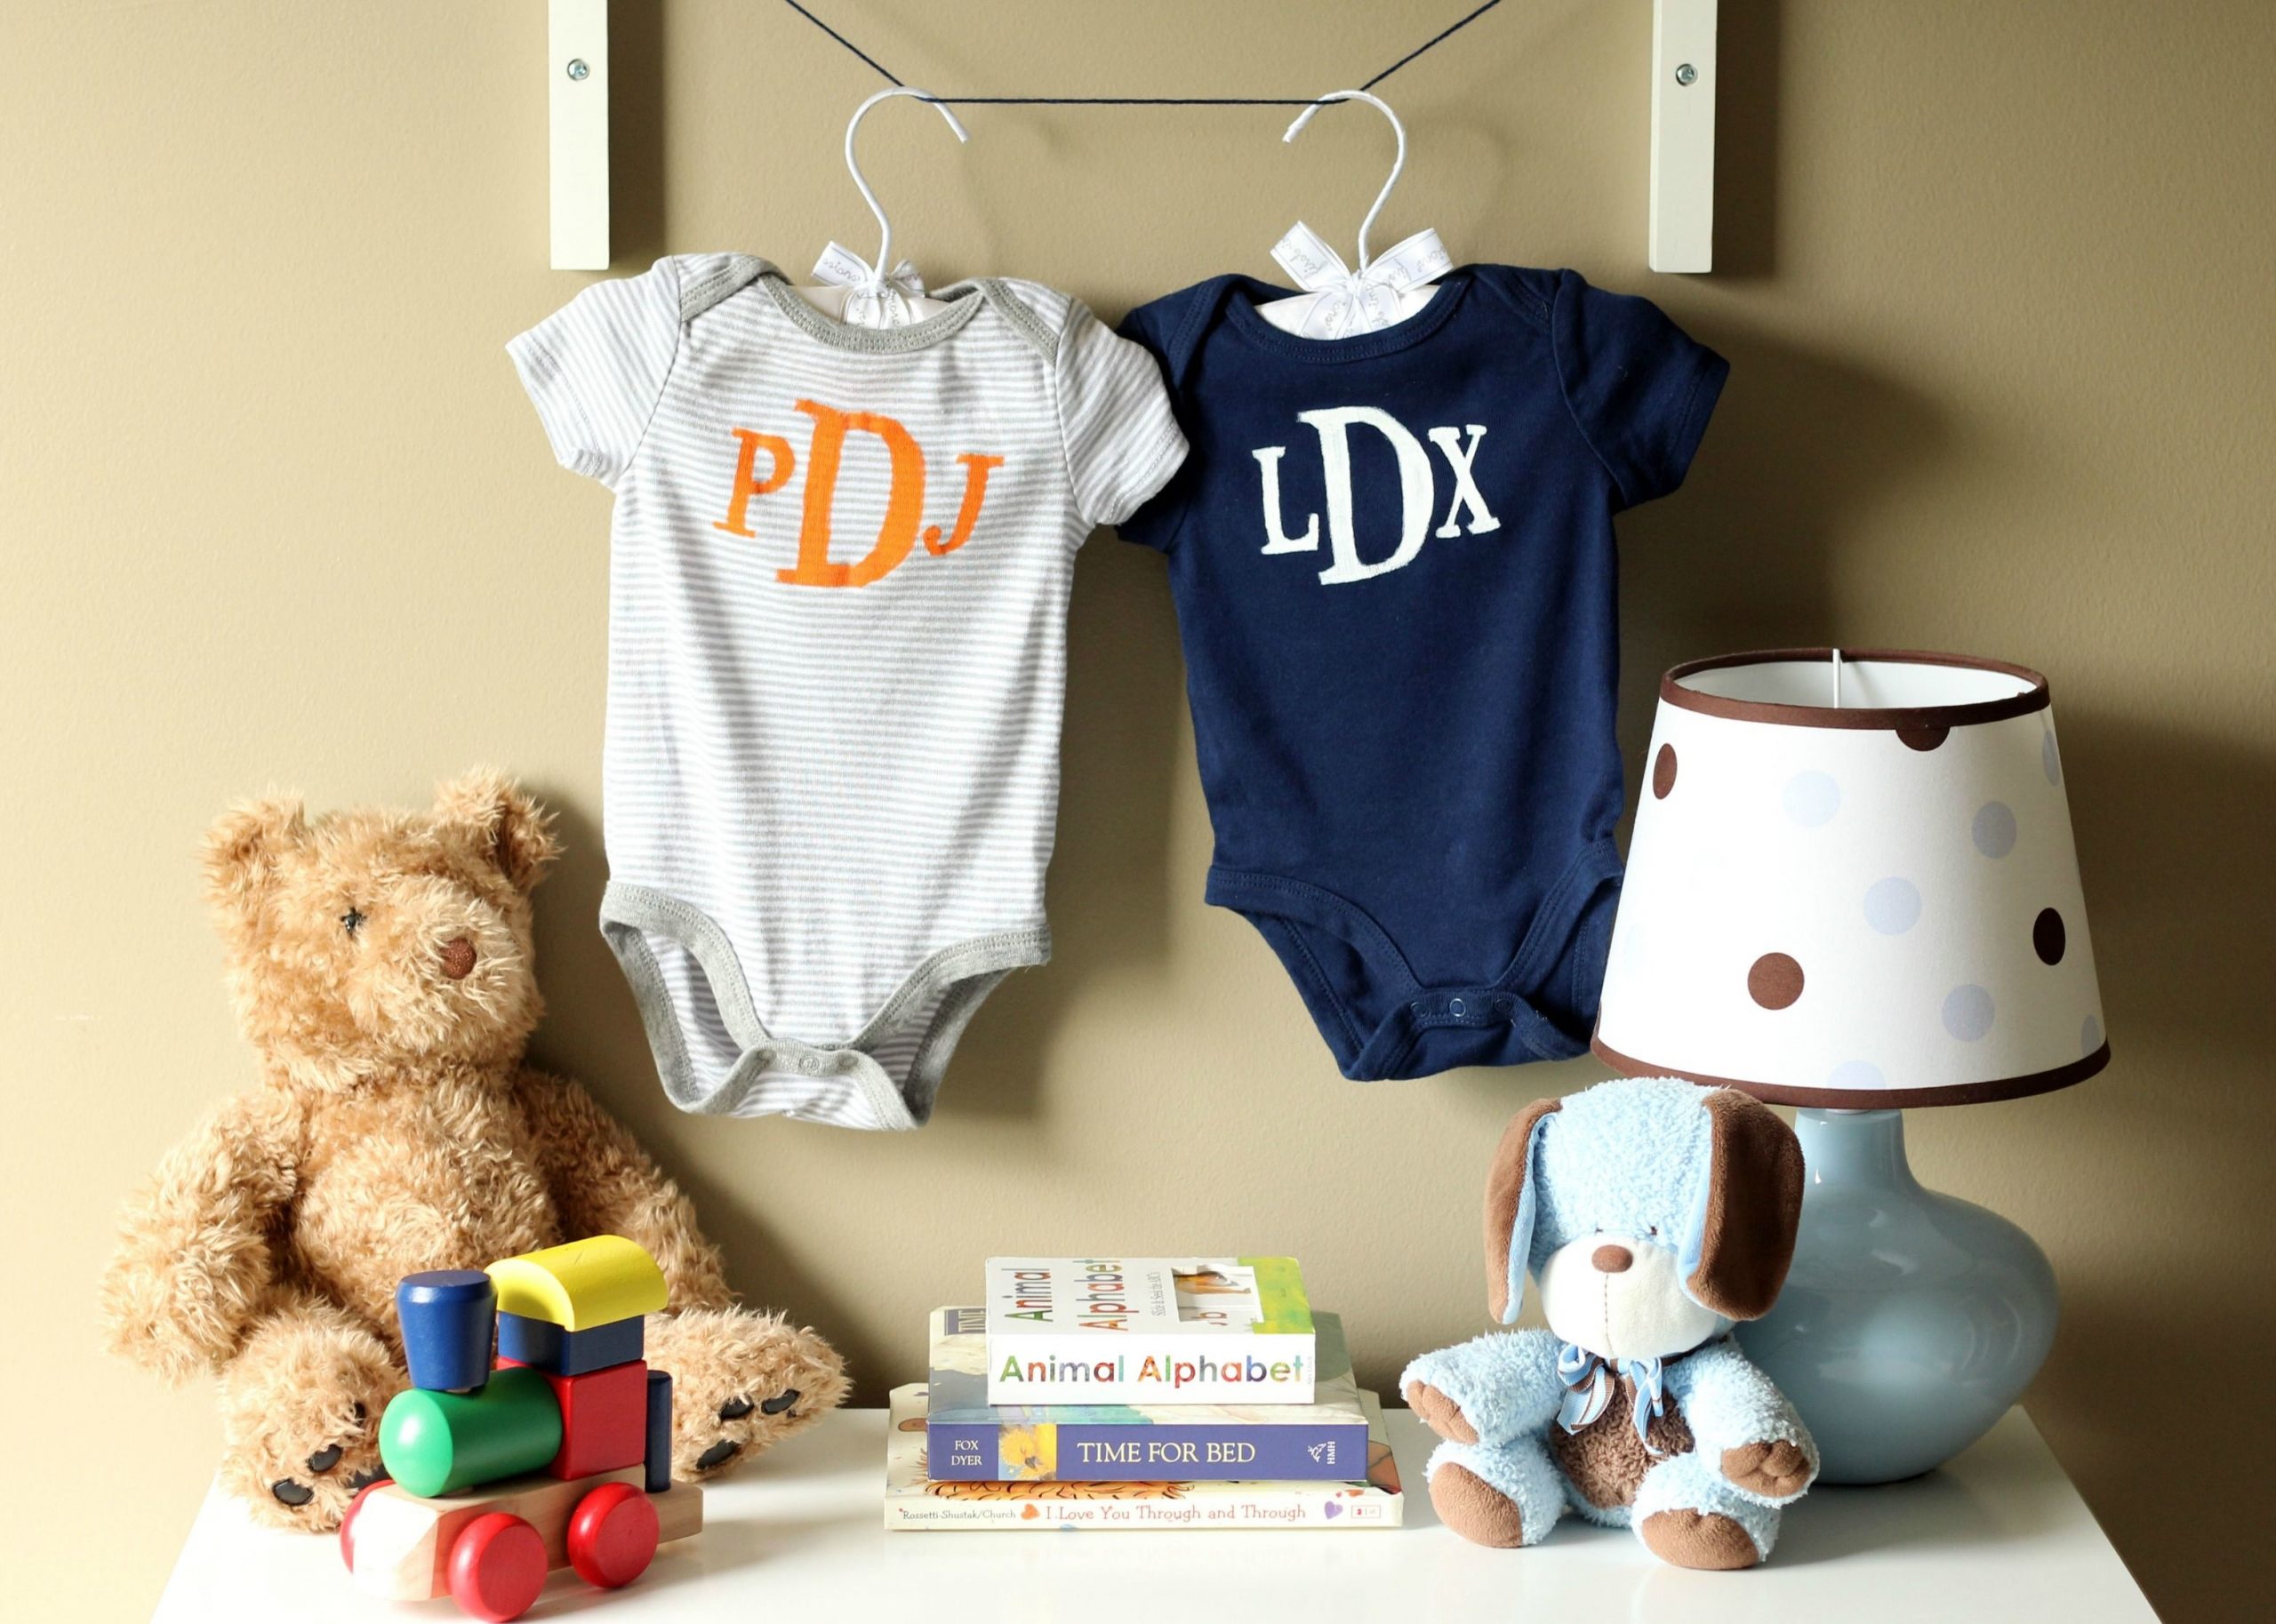 Monogrammed onesie DIY Bewitching Baby Wear Ideas For Your Little One That Saving Your Money